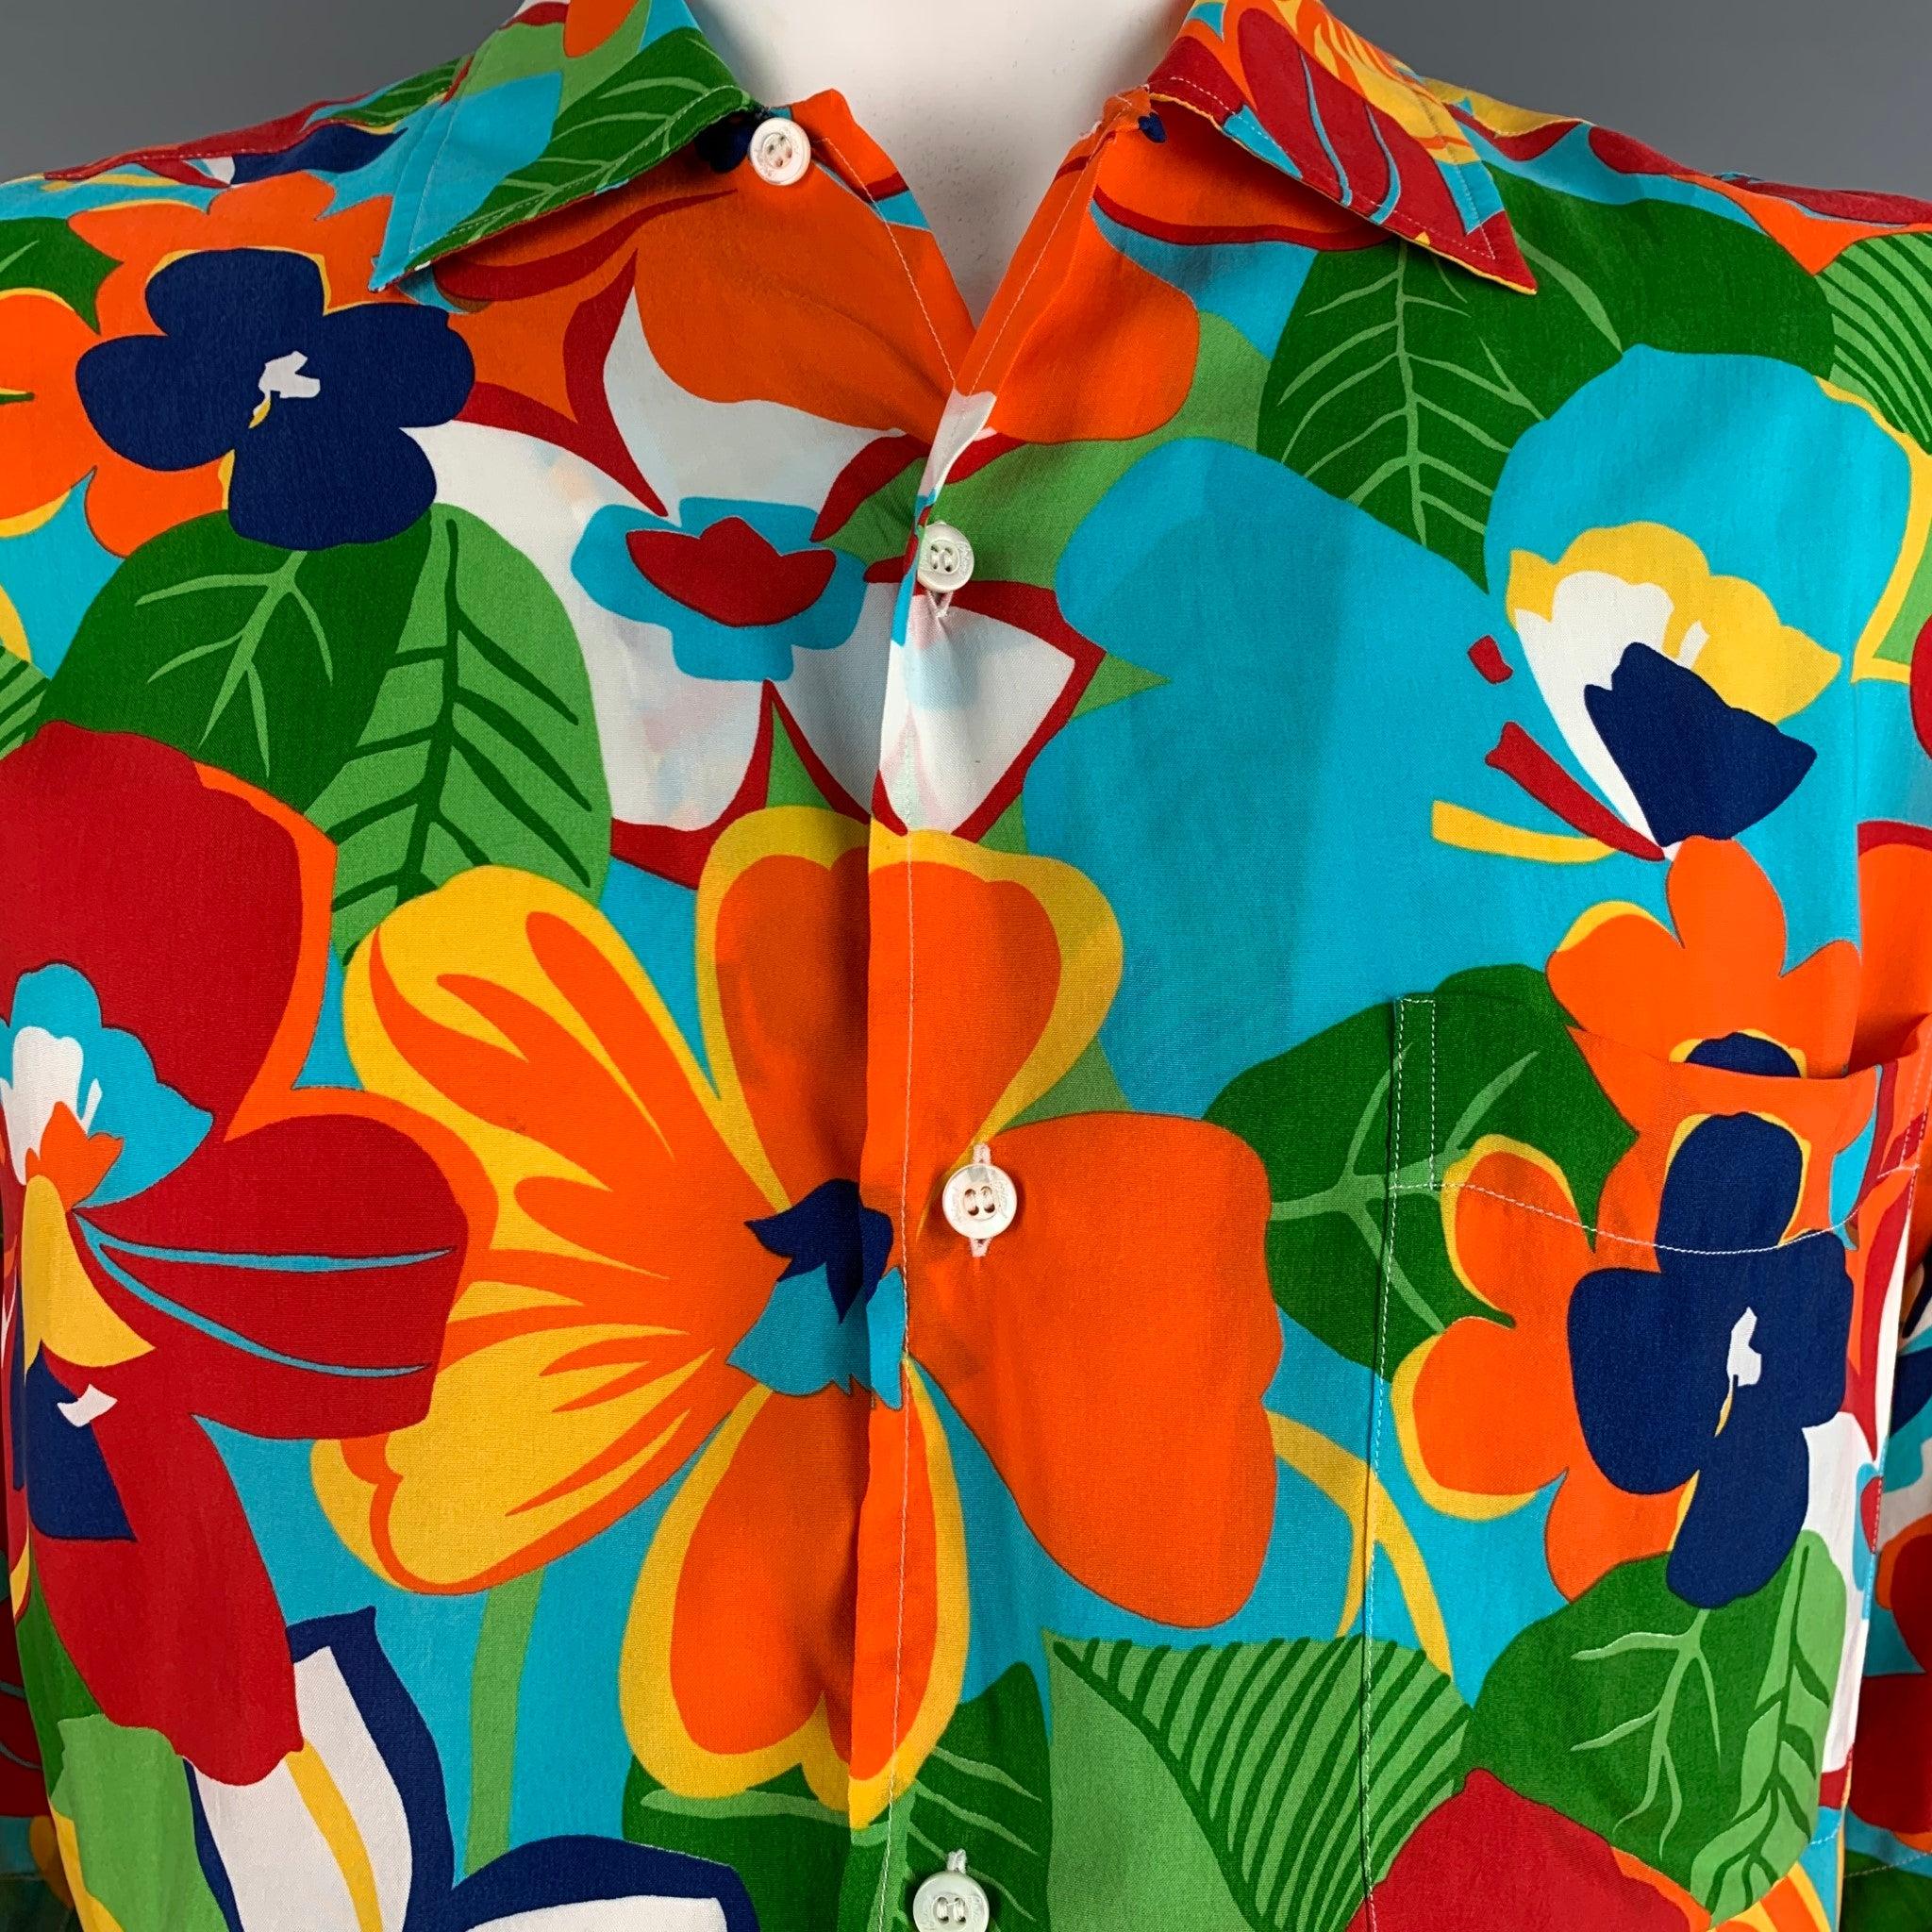 BRIONI x NEIMAN MARCUS short sleeve shirt
in a multicolor rayon fabric featuring a tropical floral pattern, one pocket, and button up closure. Made in Italy.Very Good Pre-Owned Condition. Minor signs of wear. 

Marked:   L 

Measurements: 
